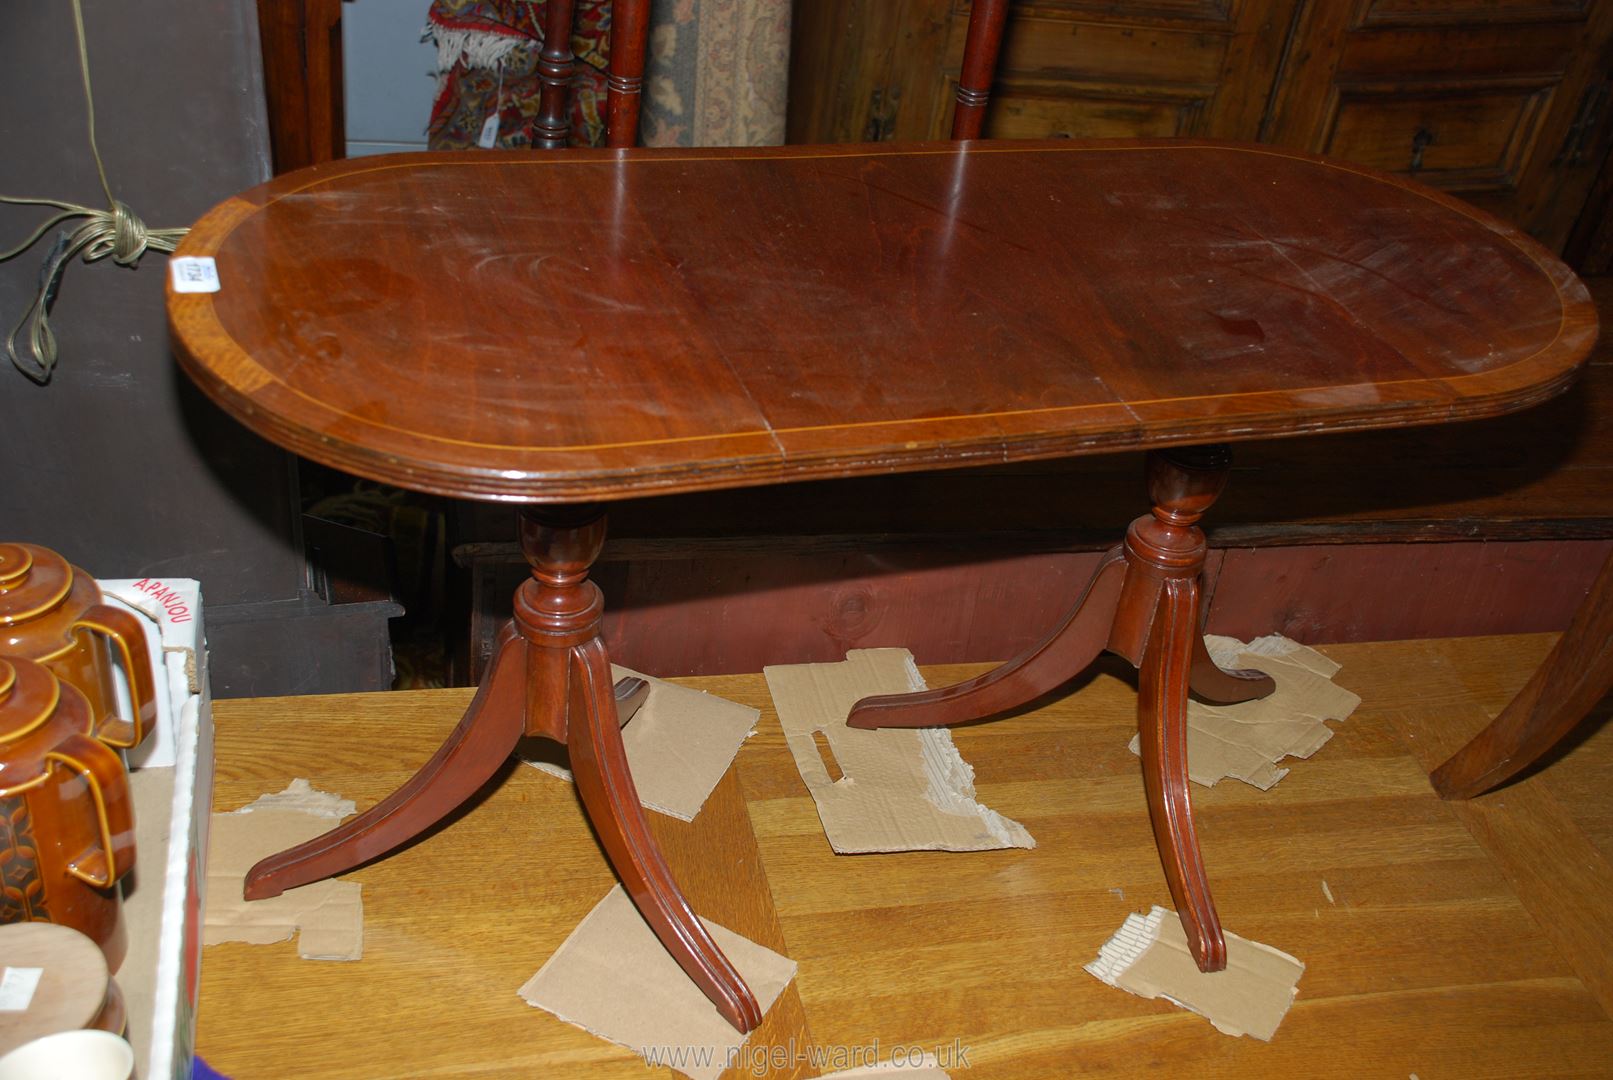 An appealing Mahogany Occasional Table in the style of a double-pedestal 19th c. - Image 2 of 3